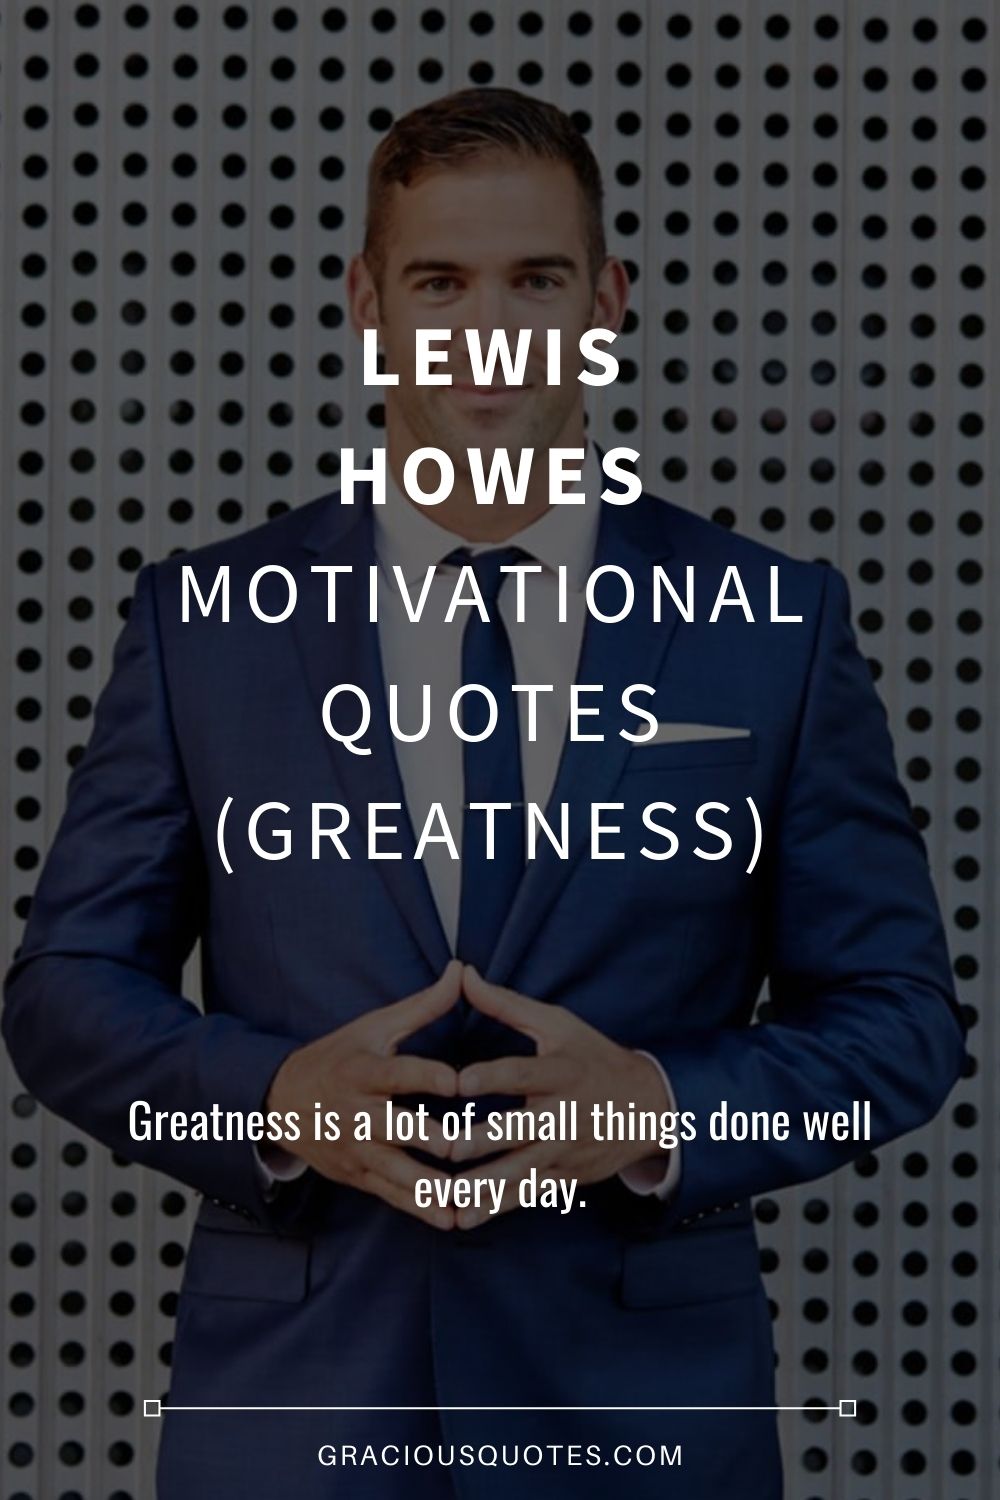 Lewis Howes Motivational Quotes (GREATNESS) - Gracious Quotes